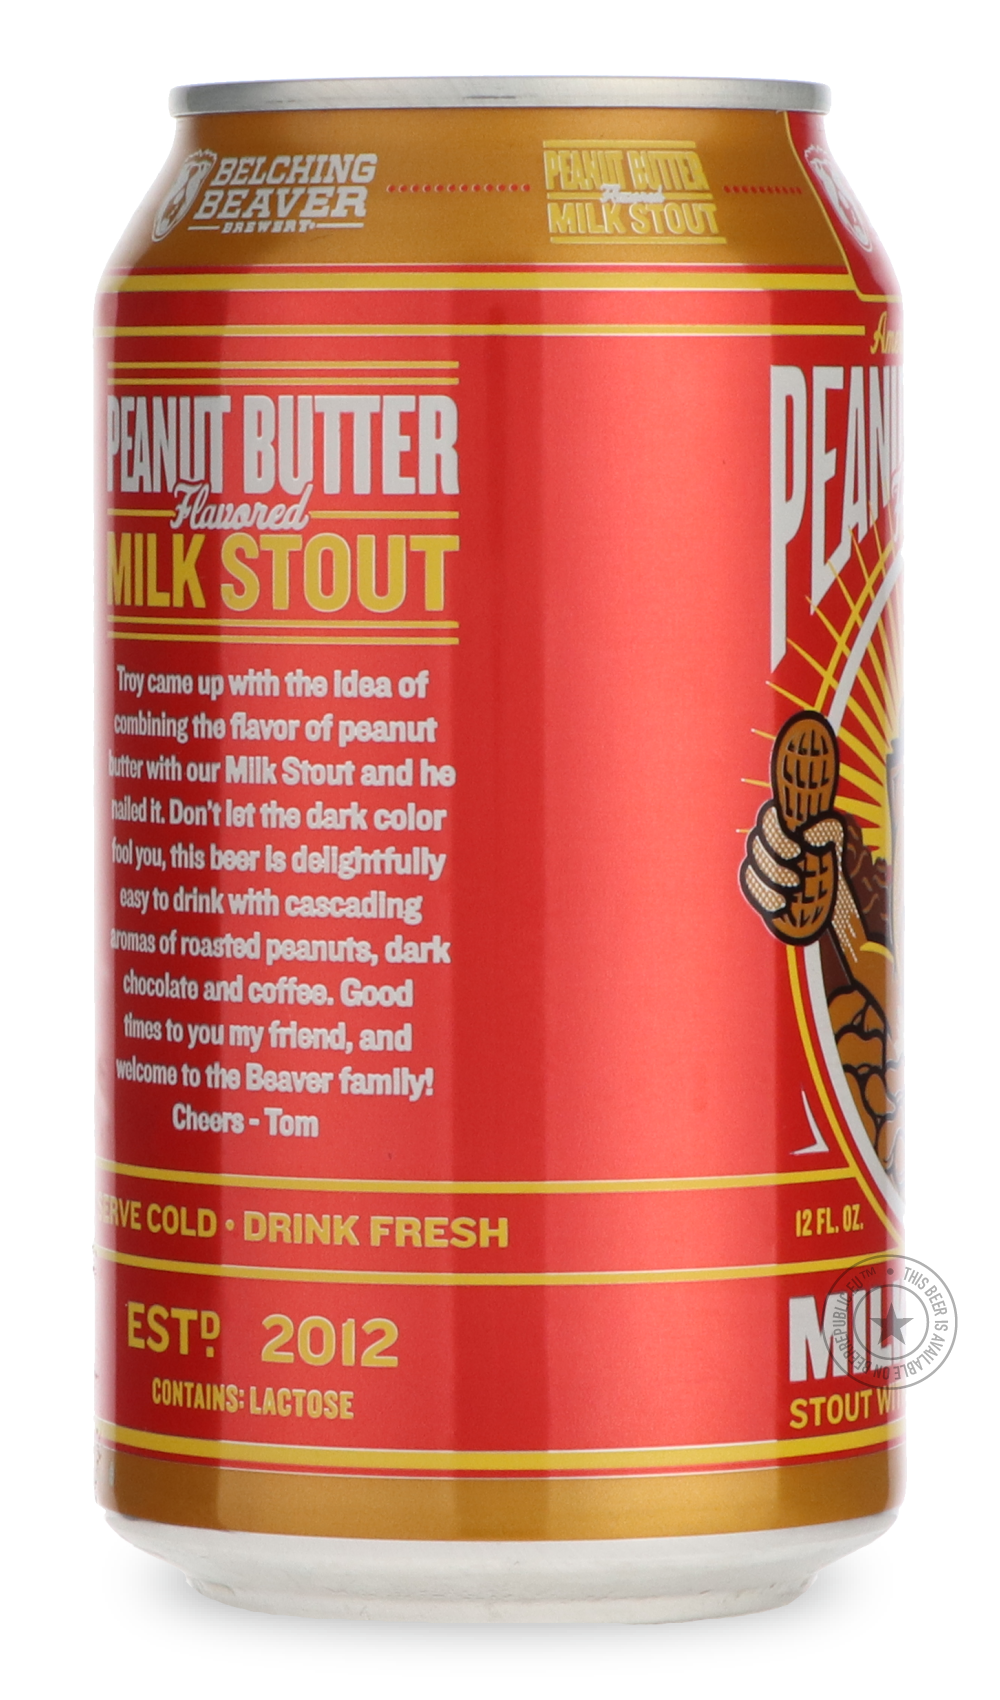 -Belching Beaver- Peanut Butter Milk Stout-Stout & Porter- Only @ Beer Republic - The best online beer store for American & Canadian craft beer - Buy beer online from the USA and Canada - Bier online kopen - Amerikaans bier kopen - Craft beer store - Craft beer kopen - Amerikanisch bier kaufen - Bier online kaufen - Acheter biere online - IPA - Stout - Porter - New England IPA - Hazy IPA - Imperial Stout - Barrel Aged - Barrel Aged Imperial Stout - Brown - Dark beer - Blond - Blonde - Pilsner - Lager - Whea